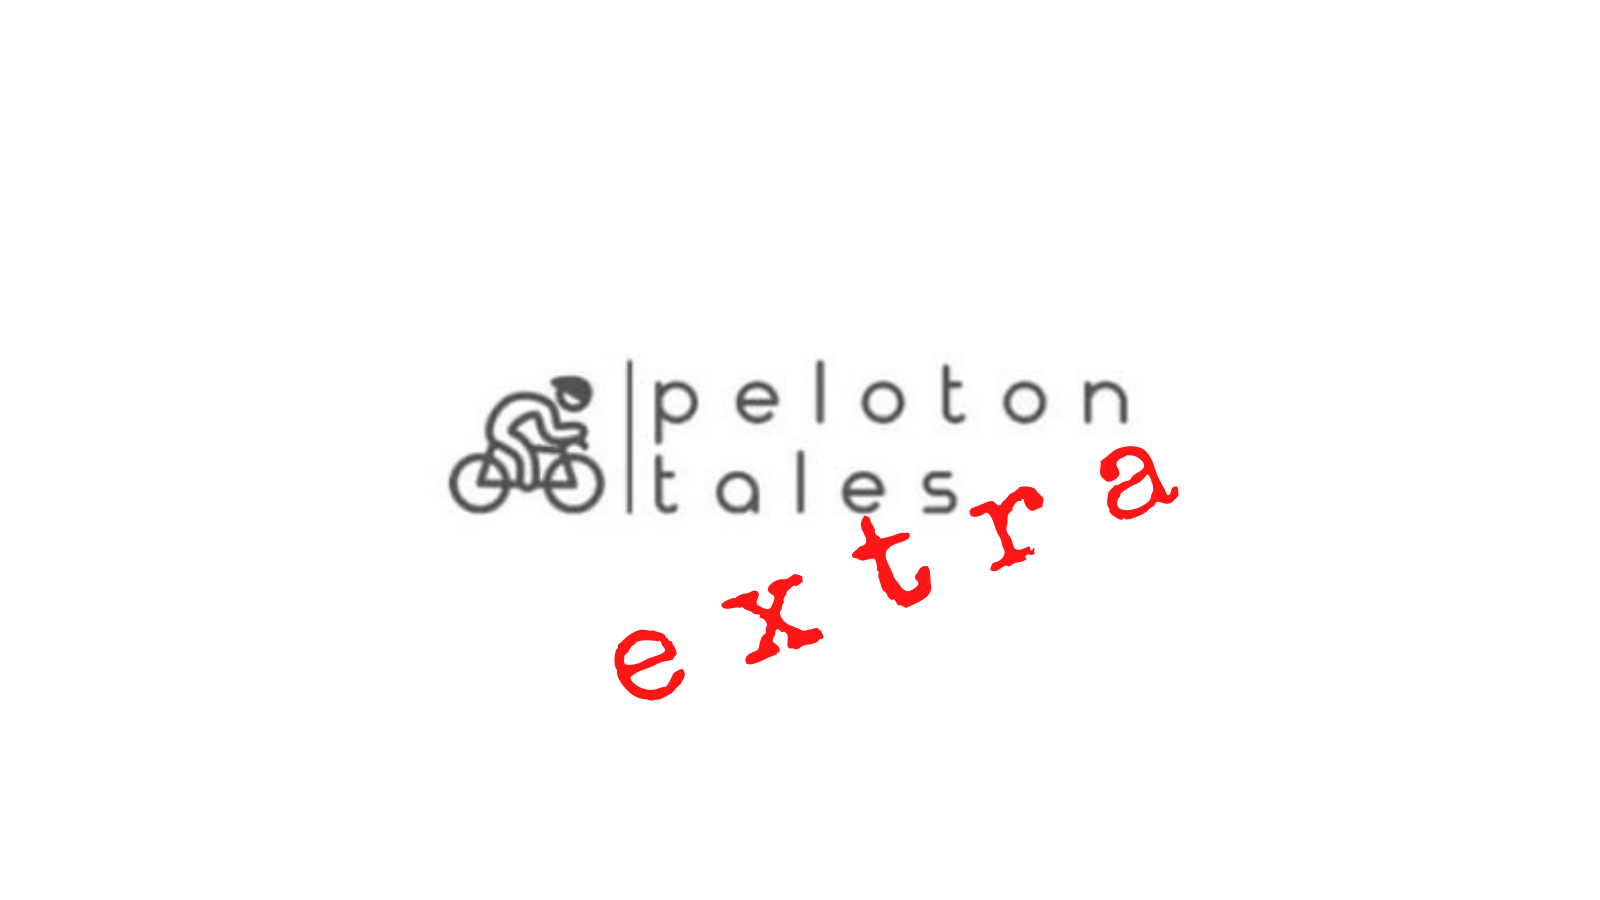 Peloton&Tales special content about the new golden era in rosd cycling